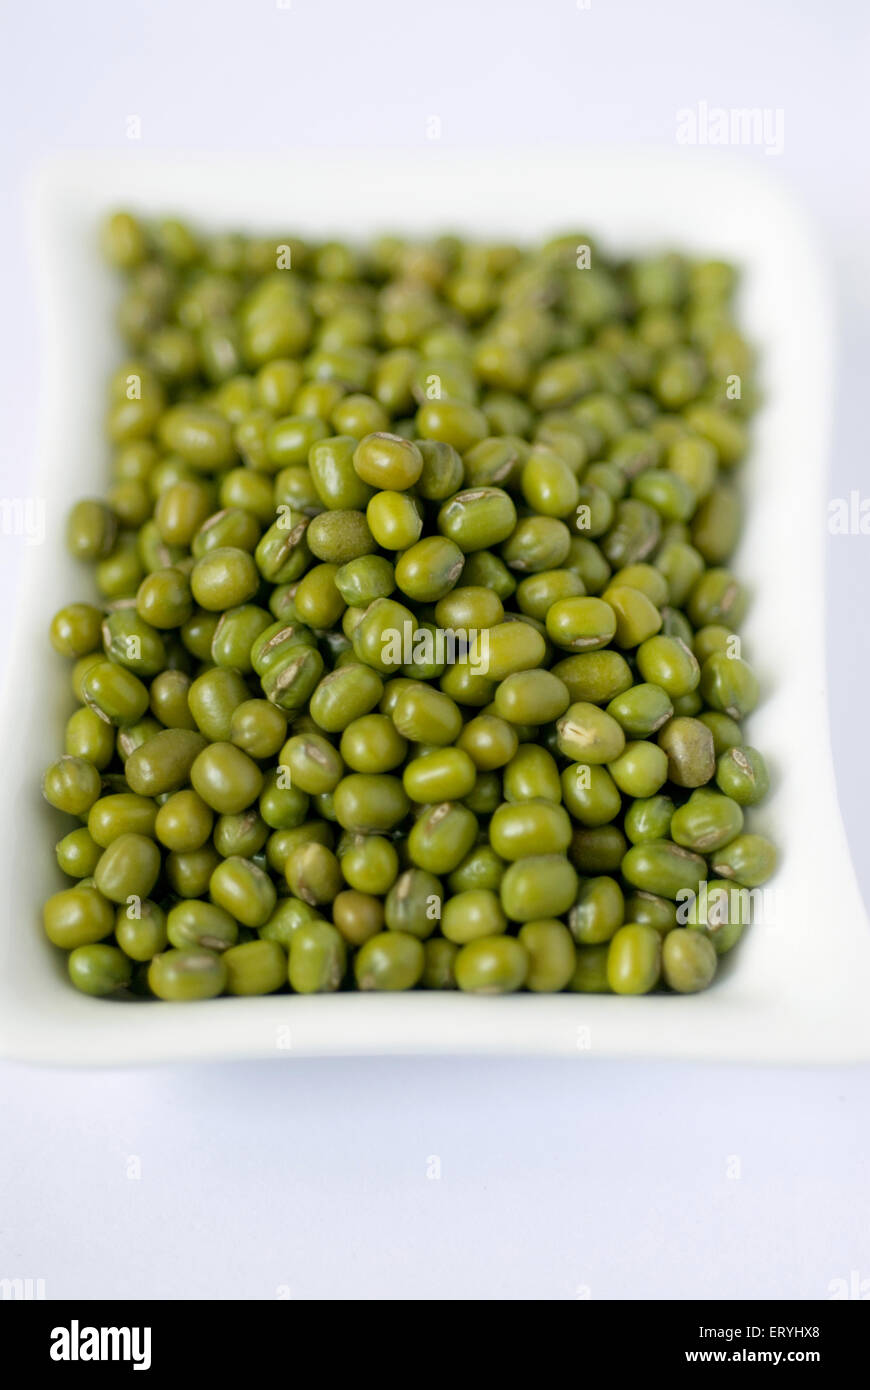 Grains ; green gram phaseolus mungo mung in tray on white background Stock Photo